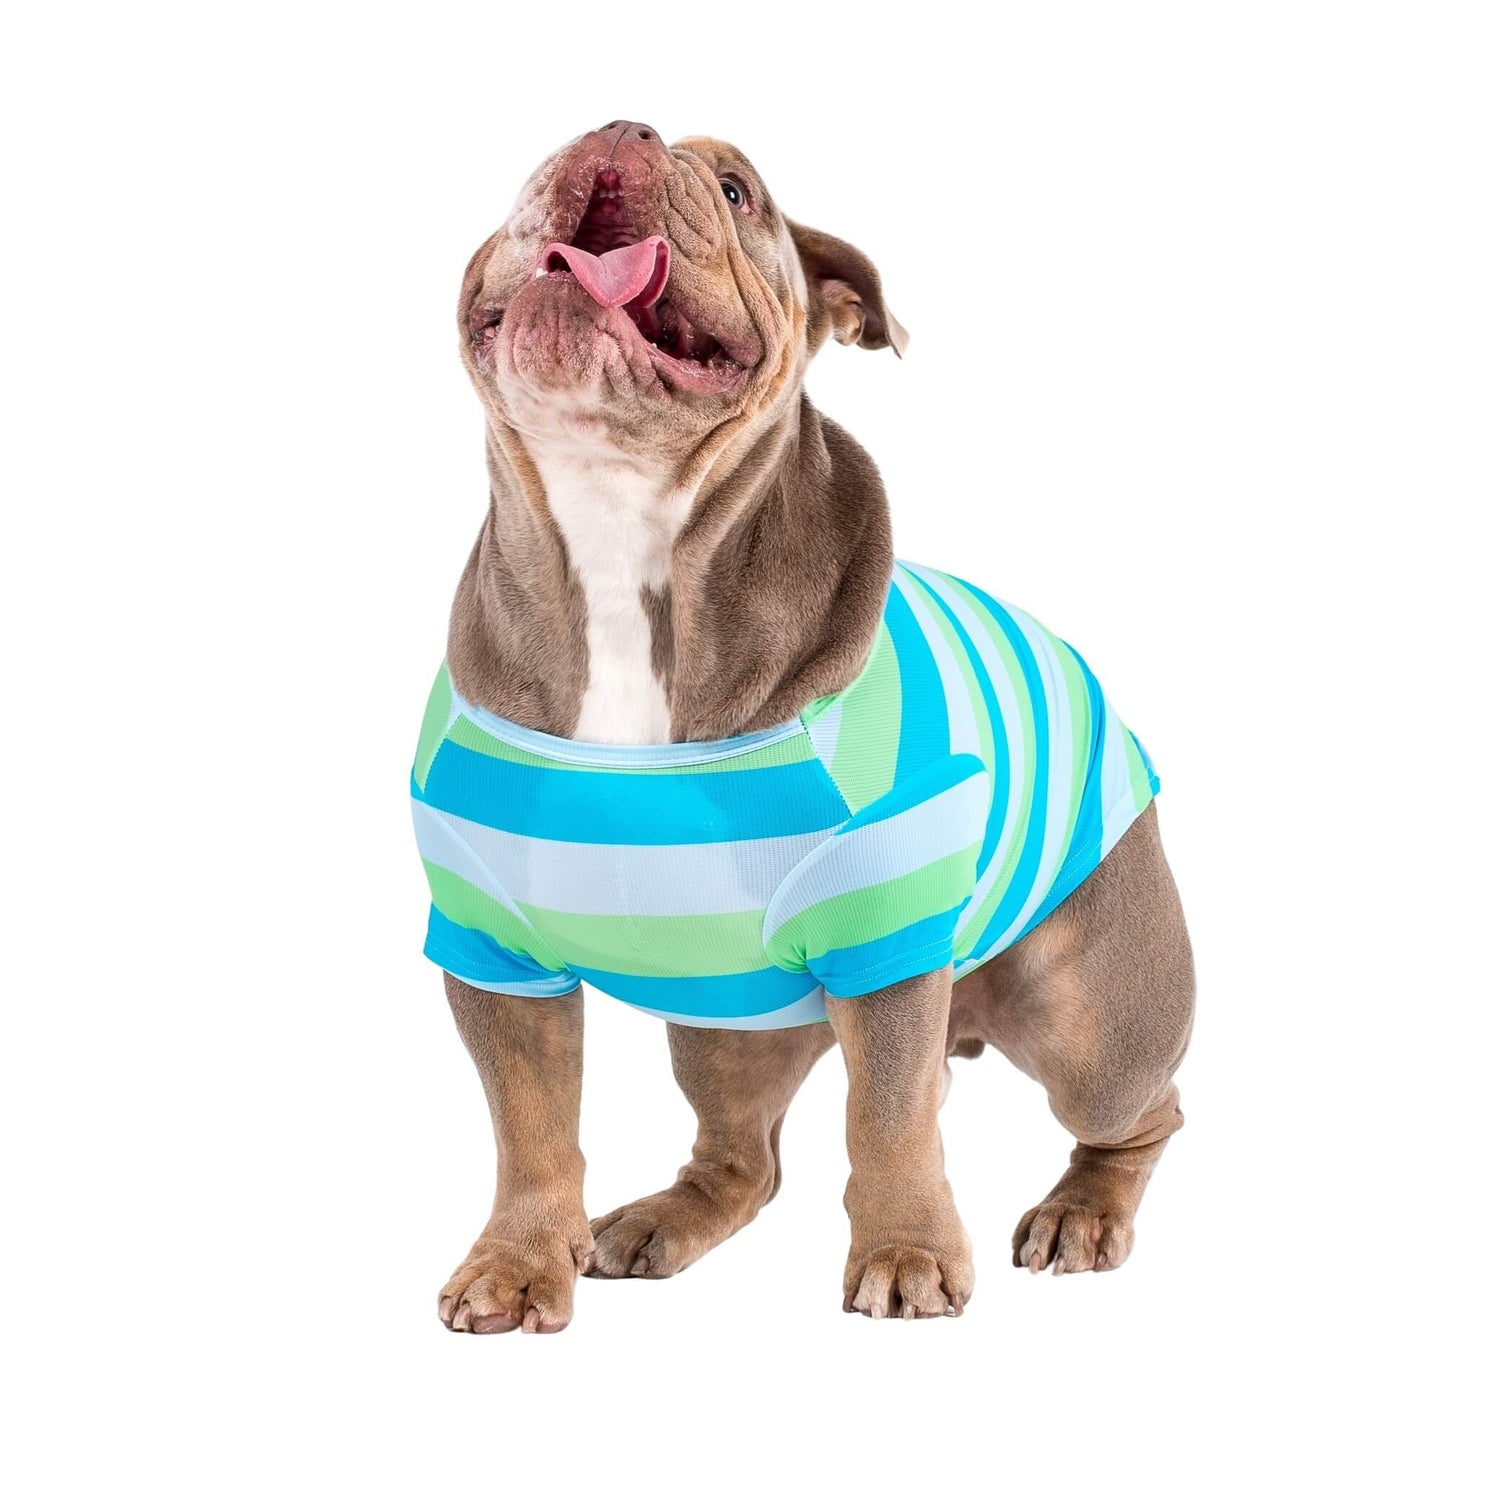 English Bulldog standing front on. The bulldog is wearing a green and blue stripped cooling tee for dogs.